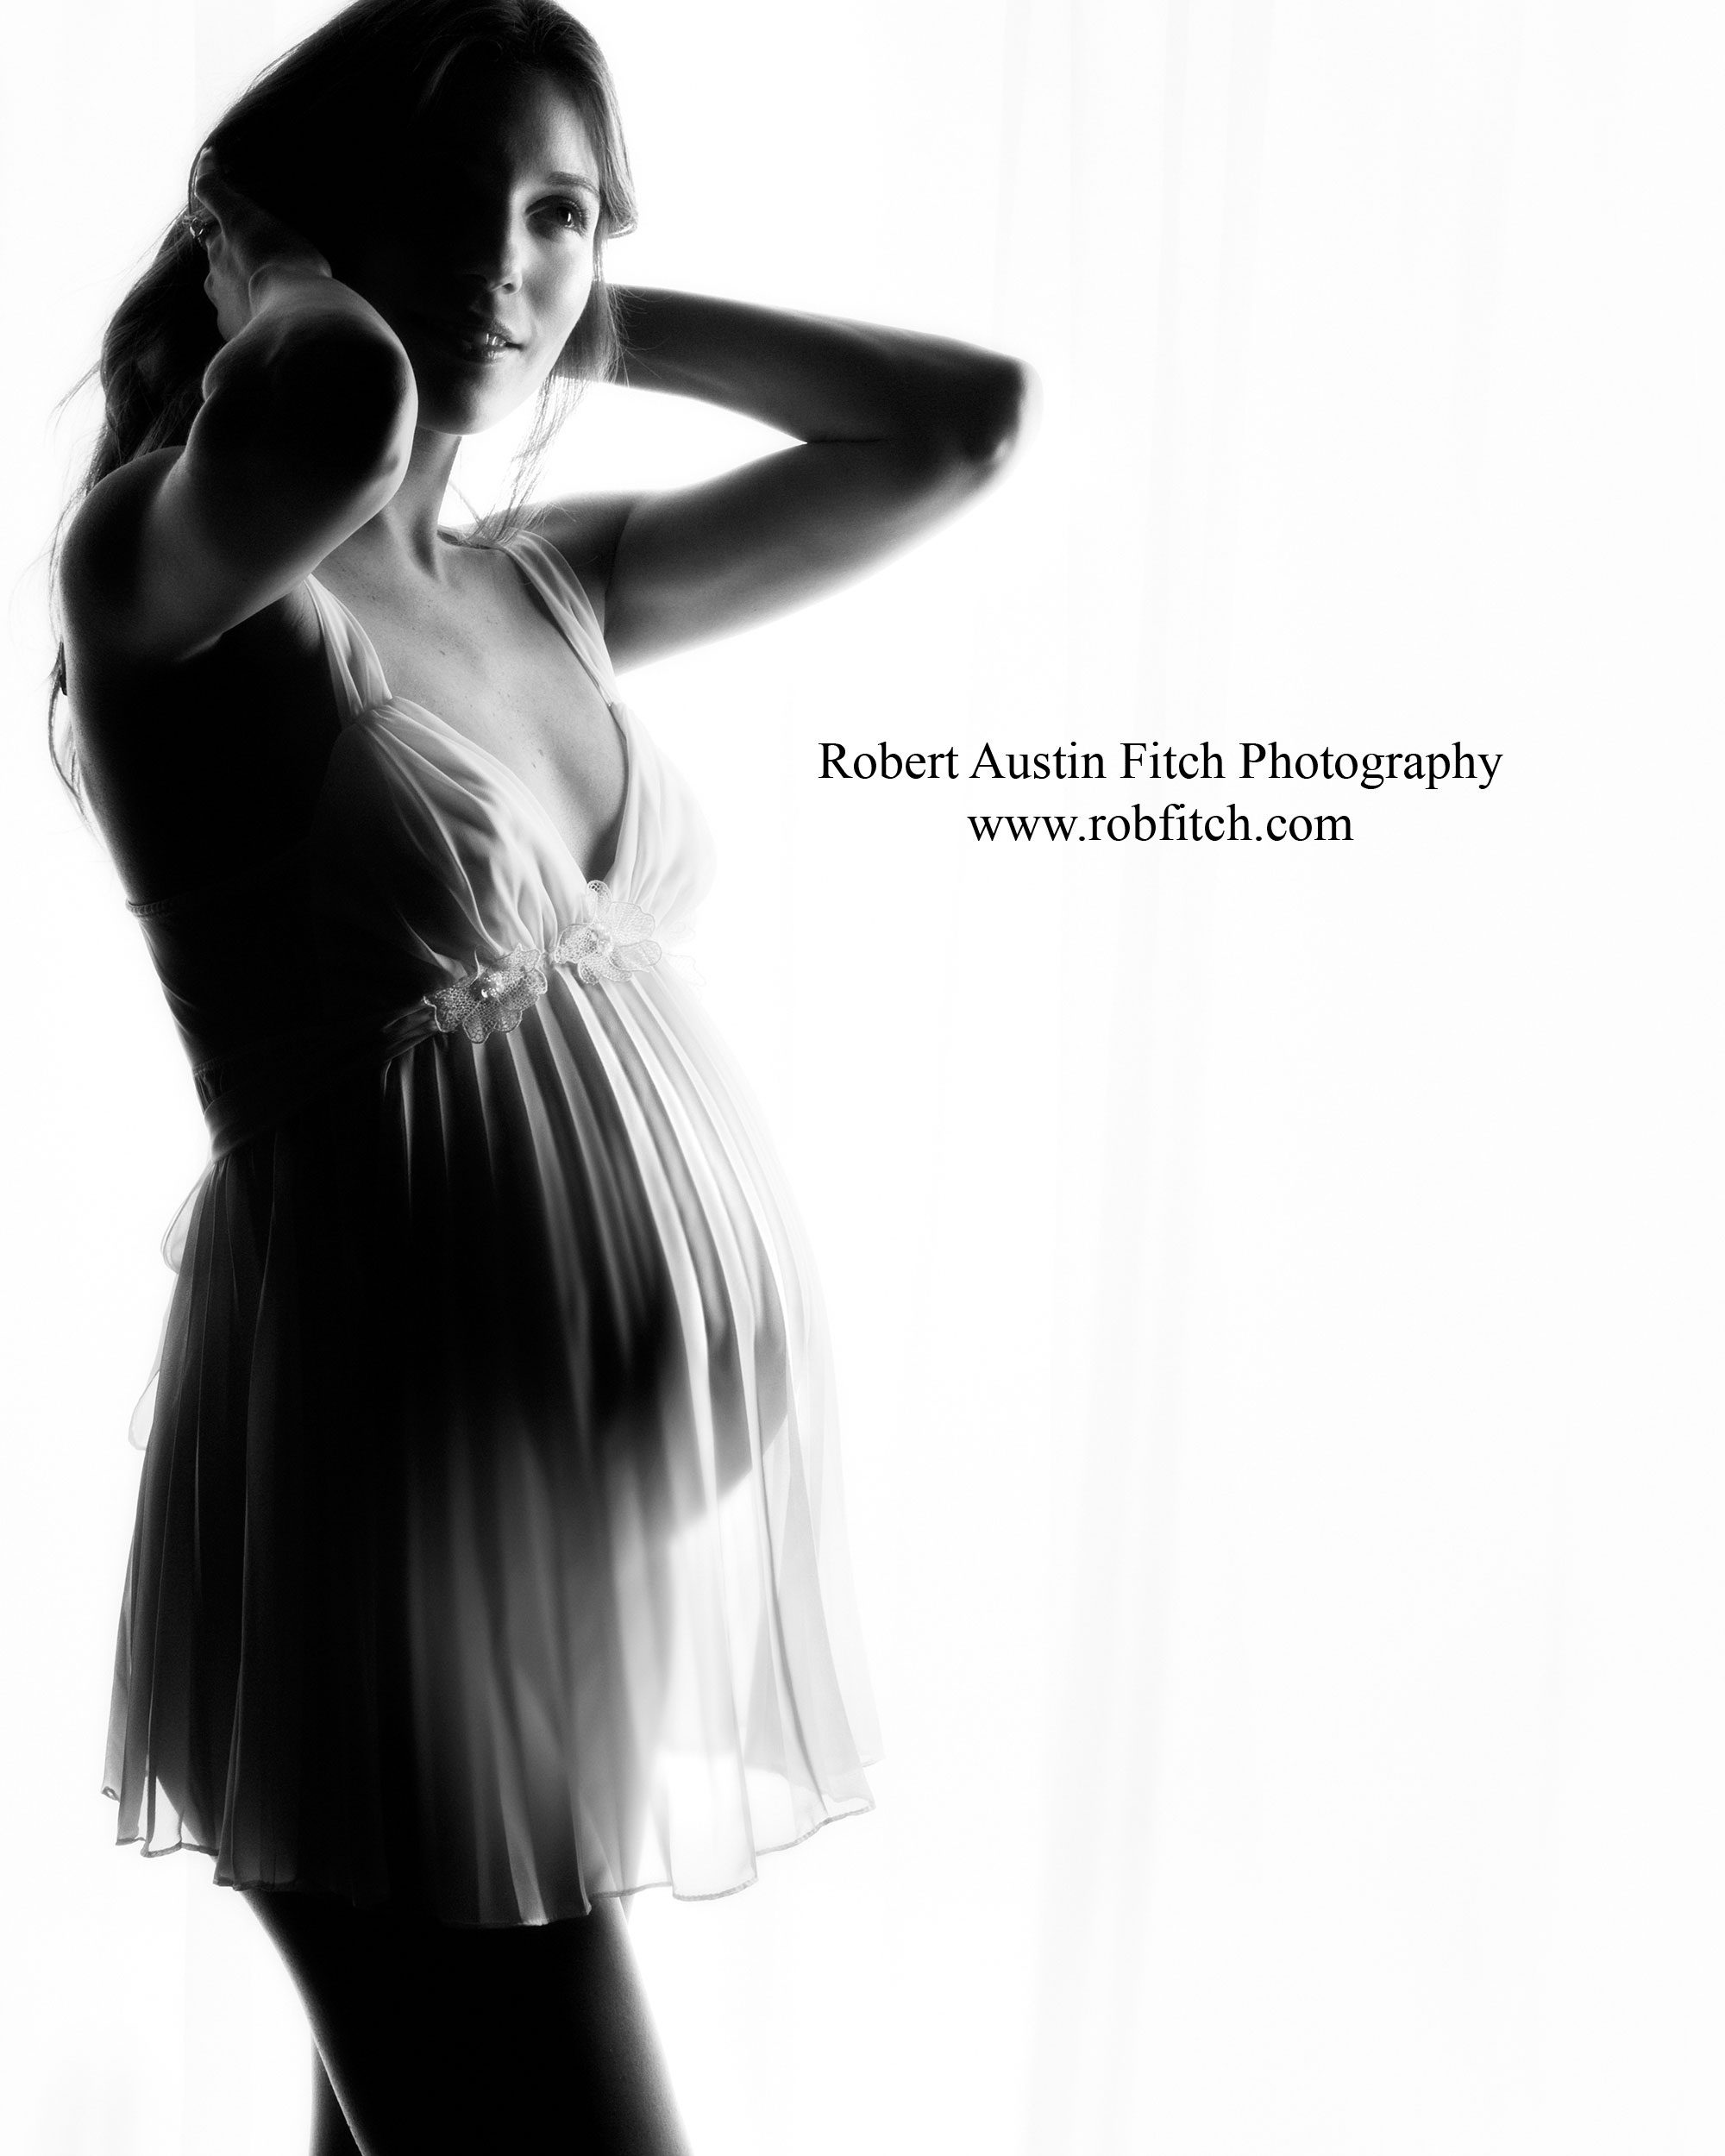 Artistic silhouette maternity photo shoot New Jersey